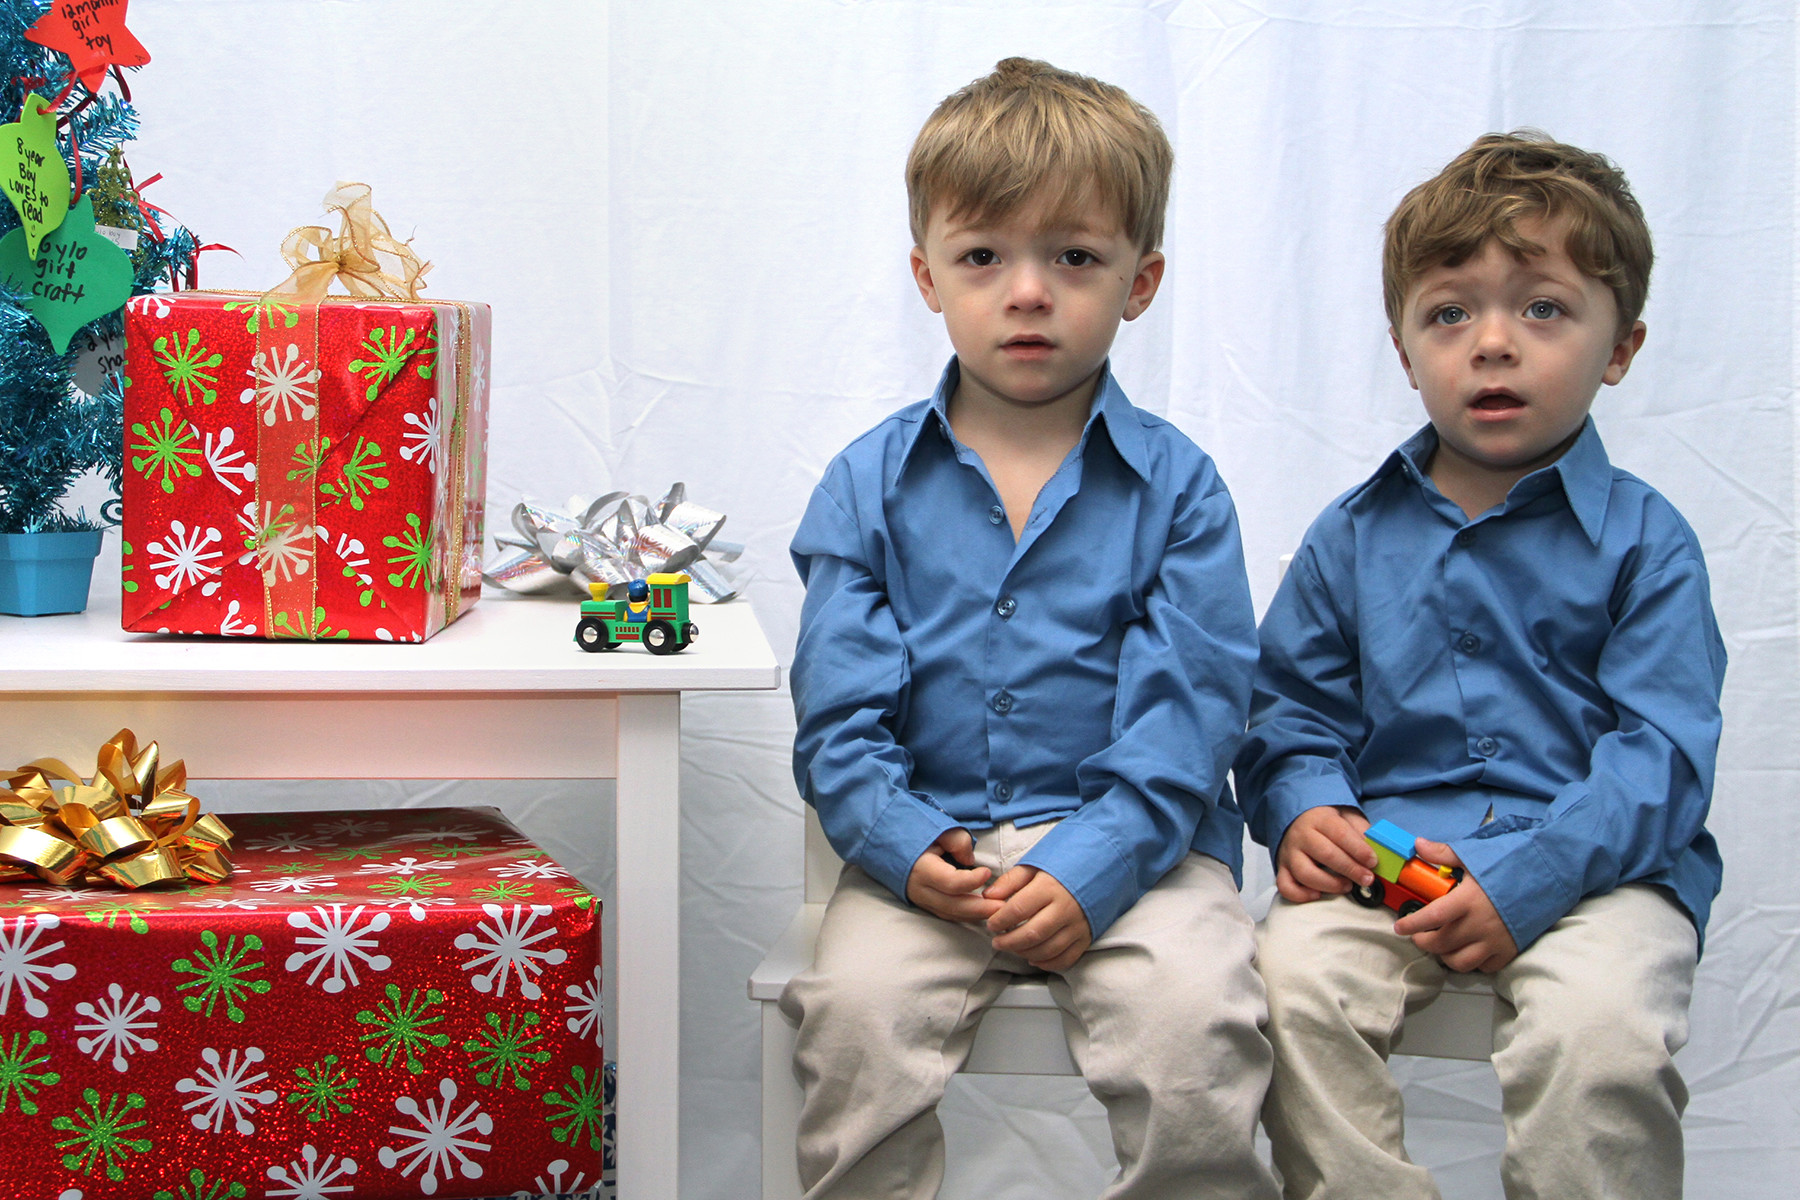 Twins John and Michael Vicario got their holiday photo taken by Kids First.